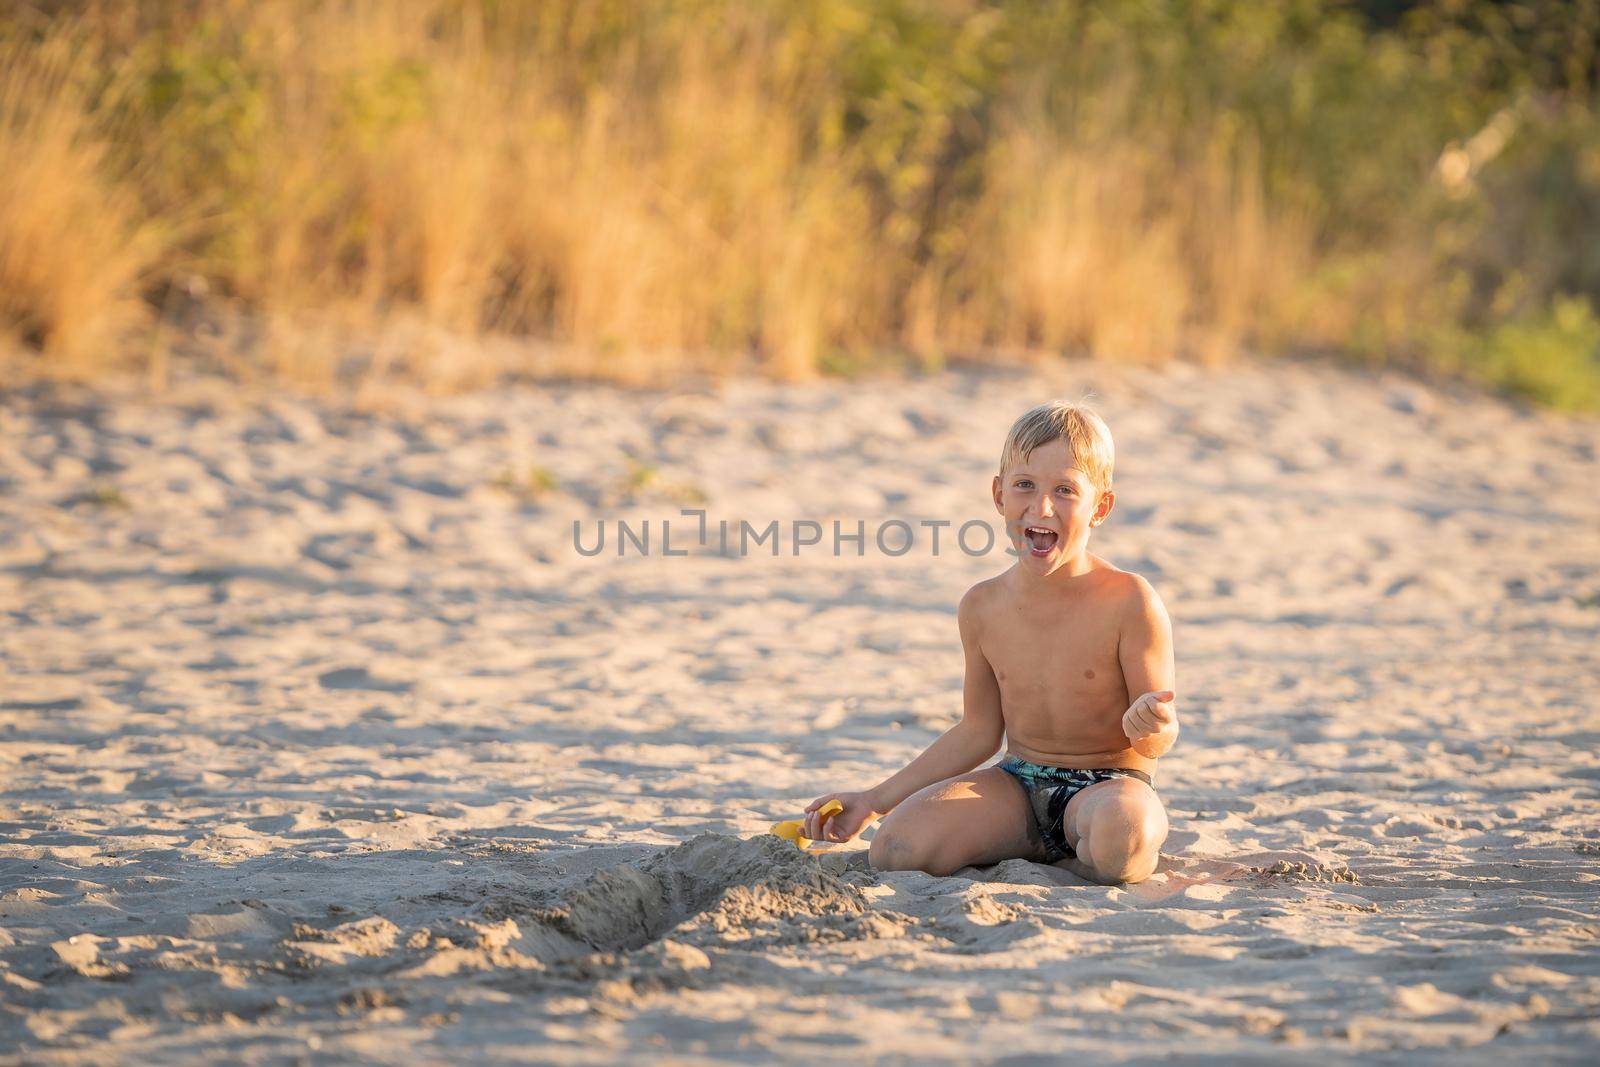 Little blond boy playing with small colorful plastic sand toy on the beach, kid building a sandcastle with fun, active happy summer holiday.